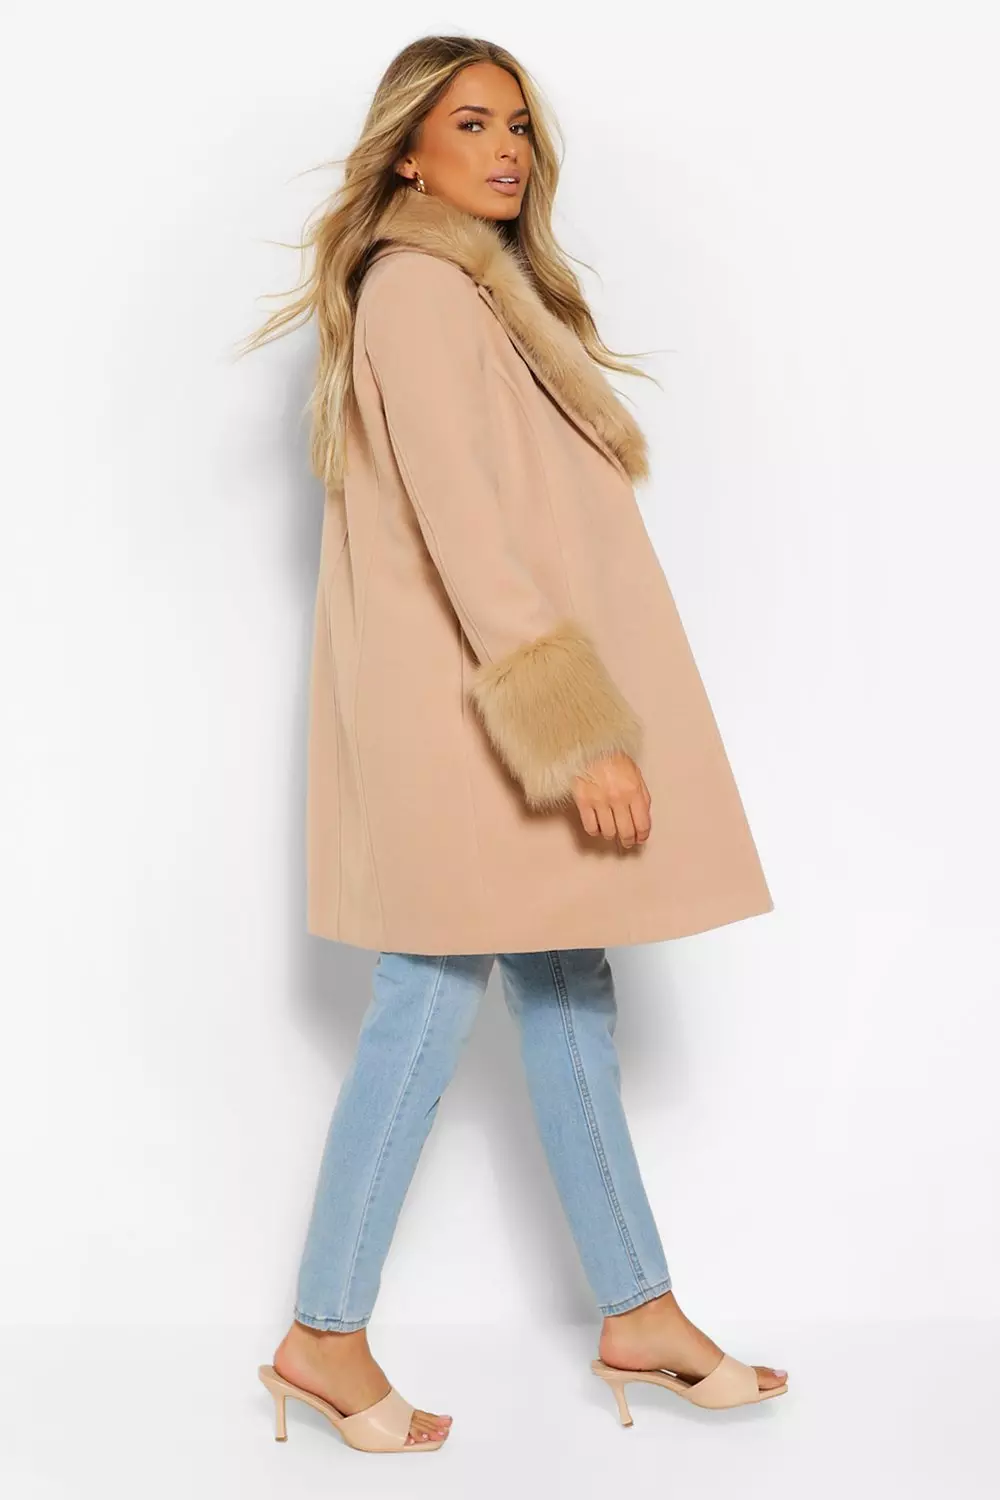 Chicwish Delicate Button Trim Faux Fur Knit Coat in Camel Brown S-M